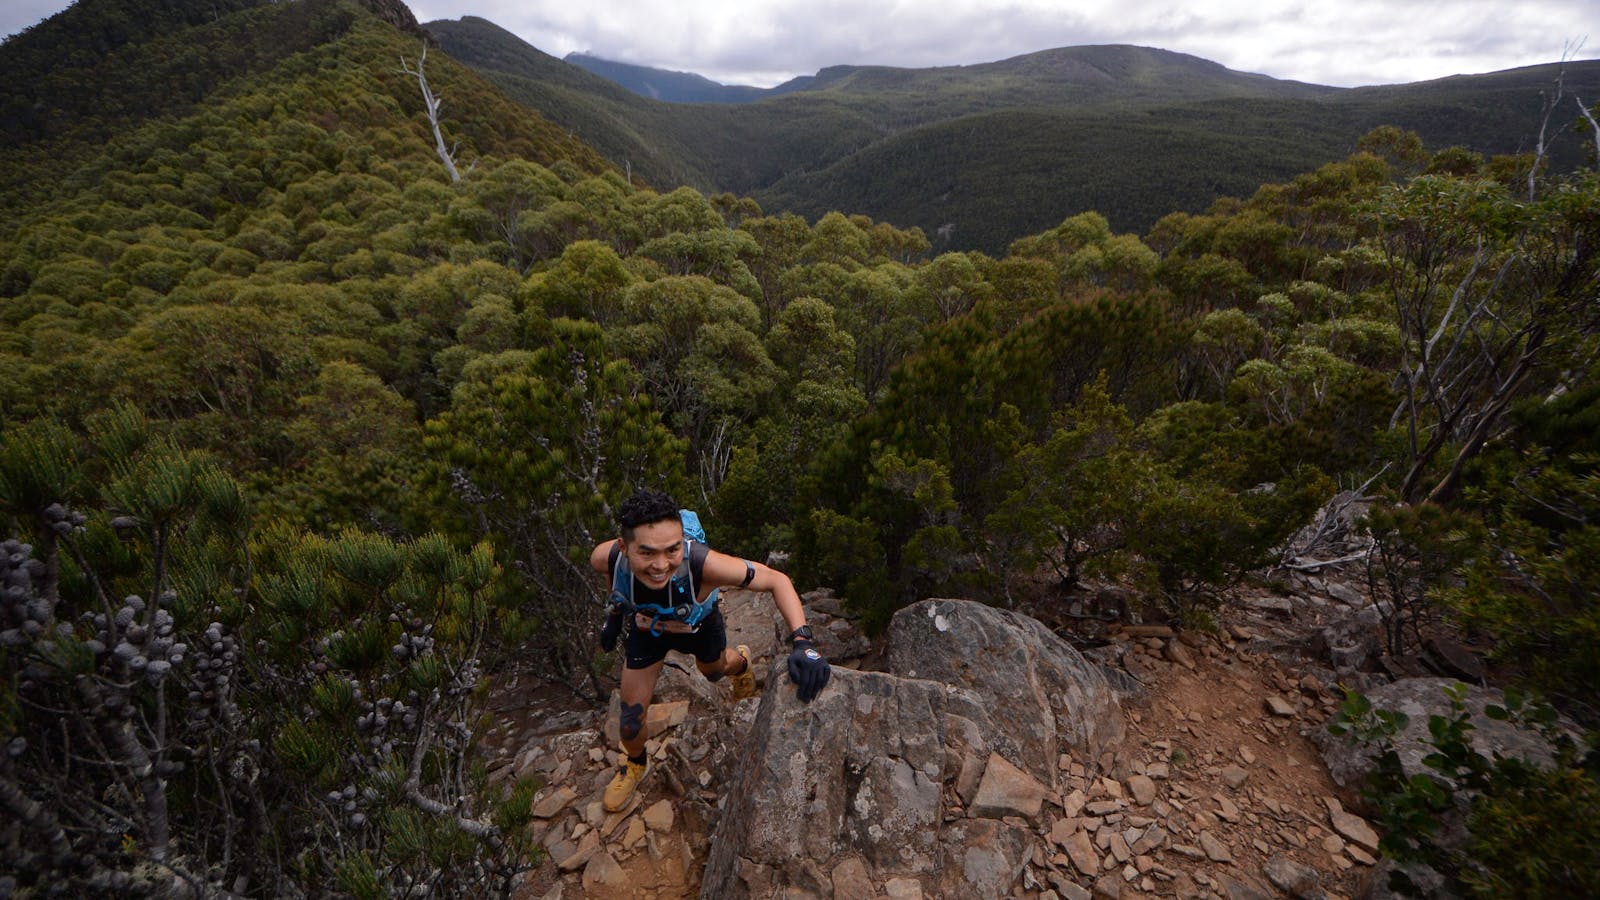 Some parts of the Ultra 66km course involve technical rock scrambling